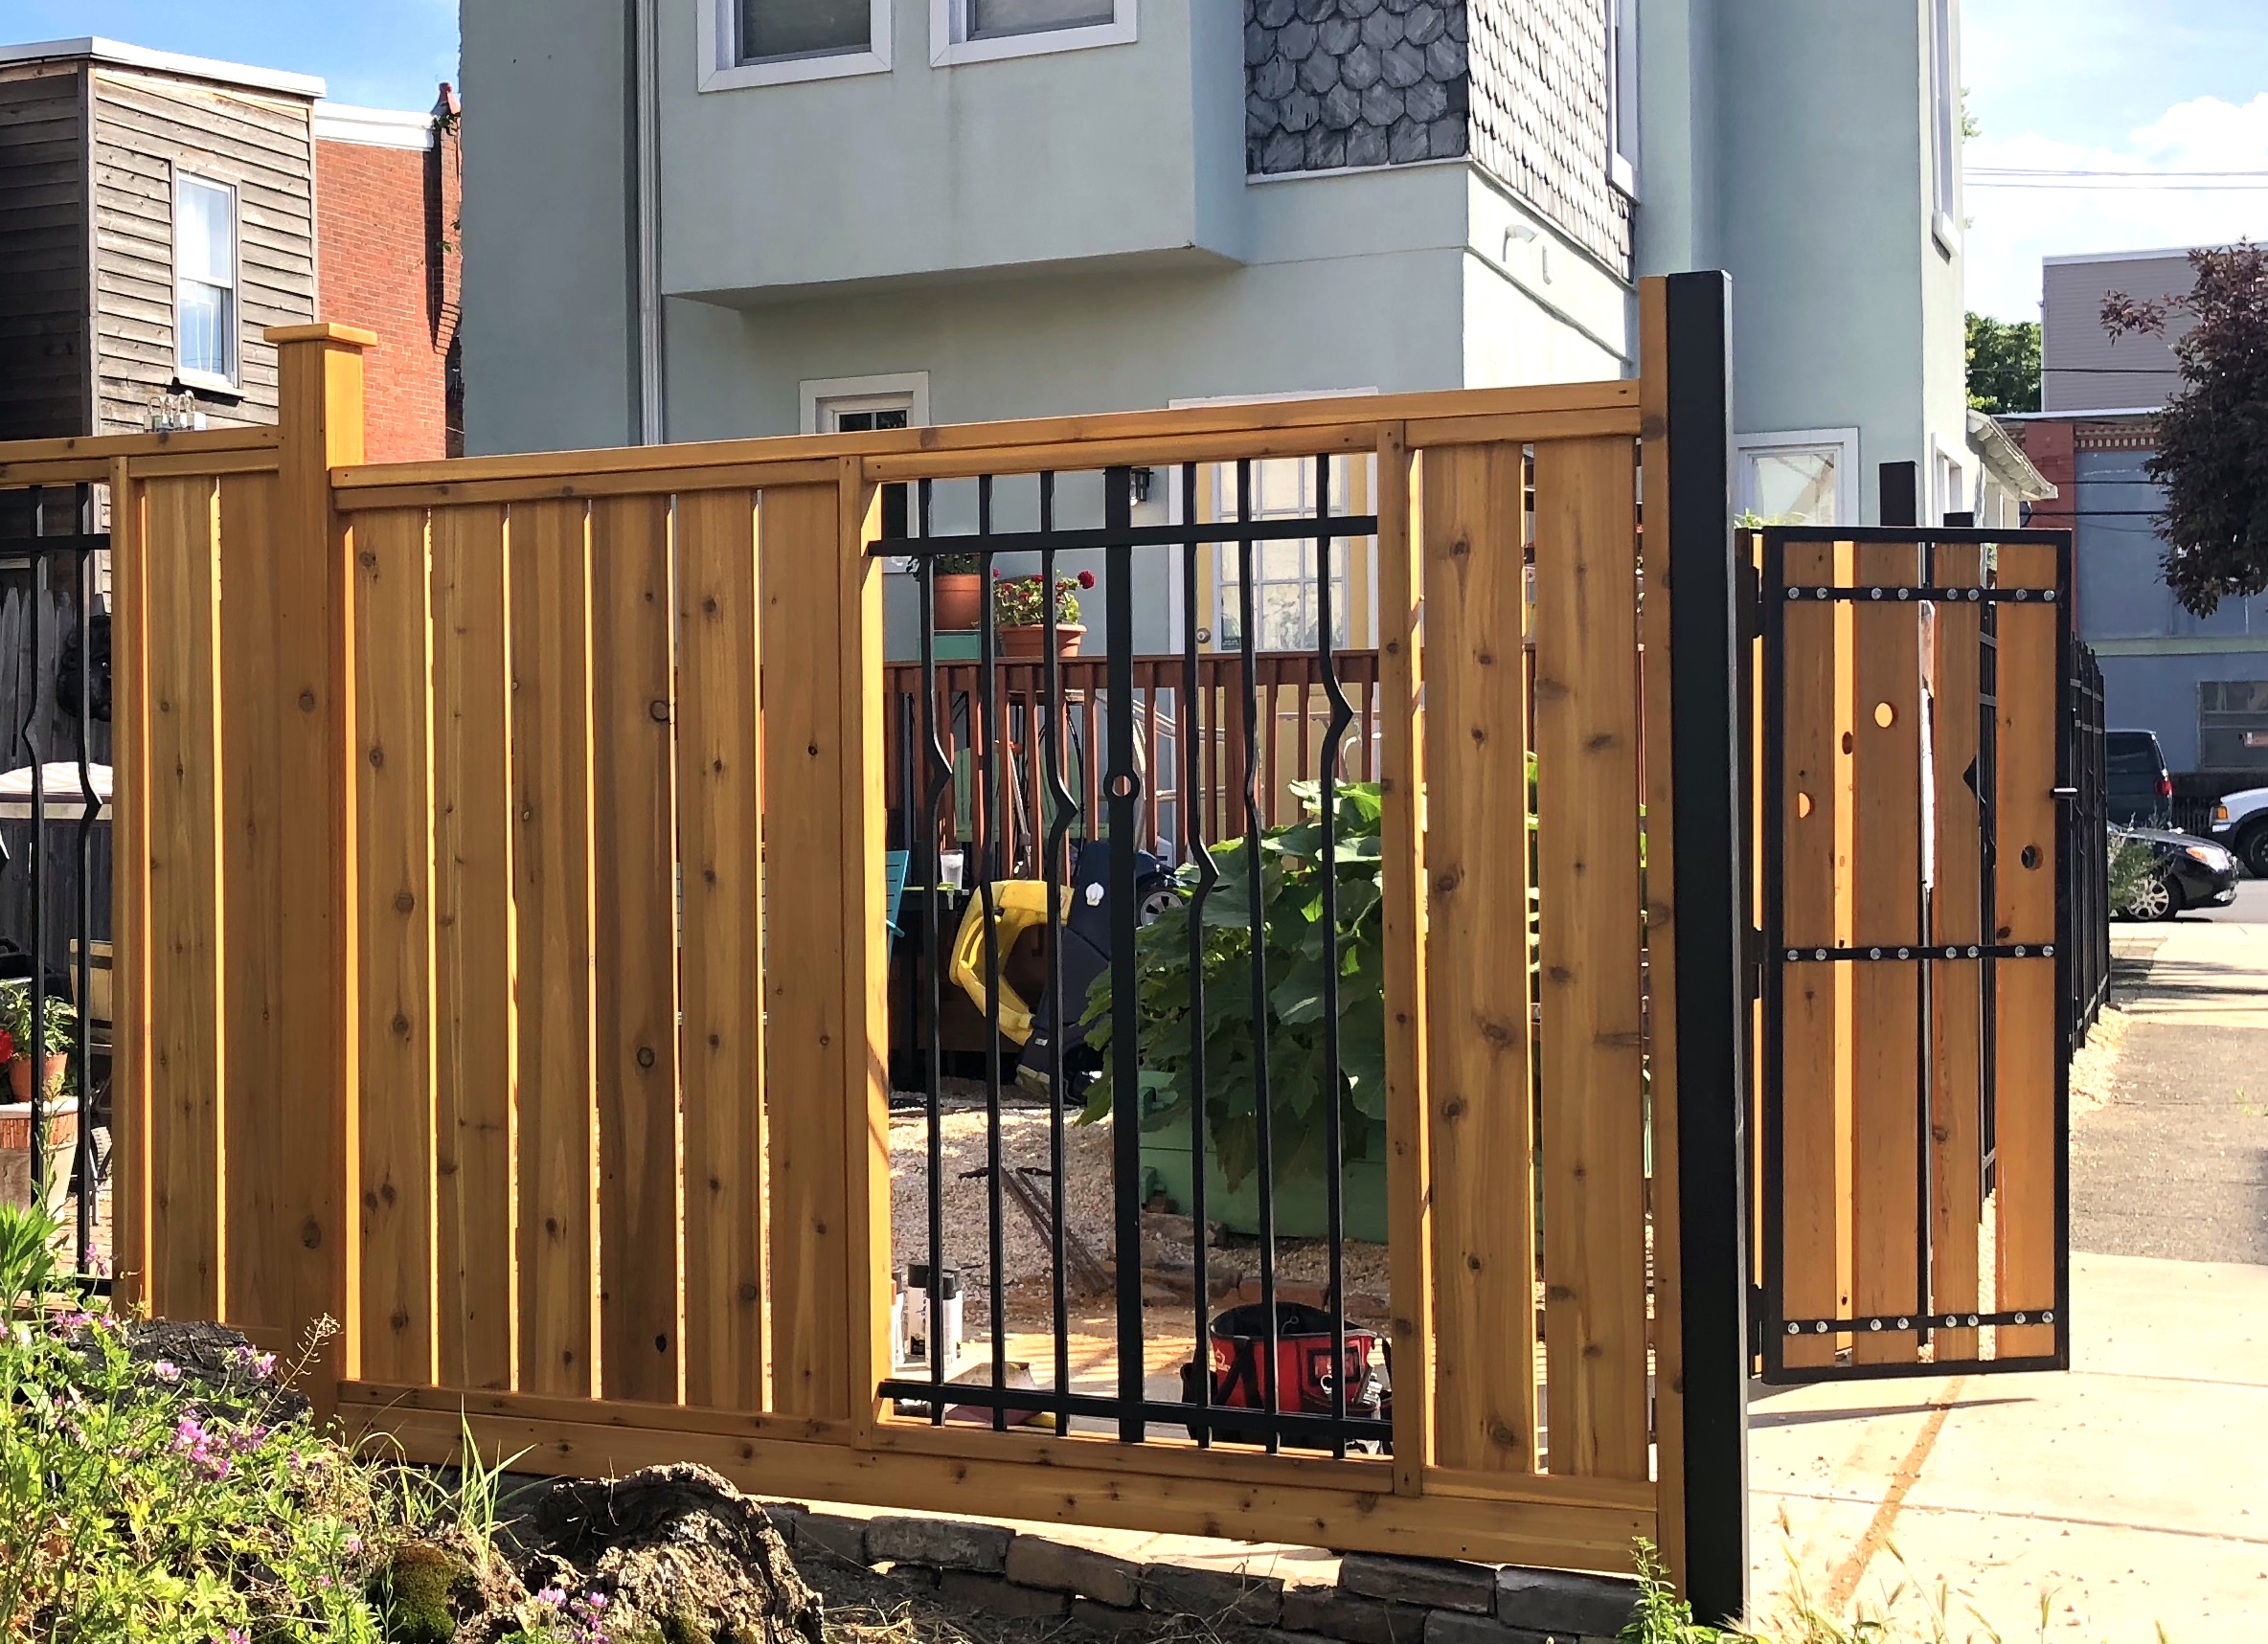 FORGED IRON FENCE WITH CEDAR DRIVEWAY GATE - private residence, Pentridge St., Philadelphia PA